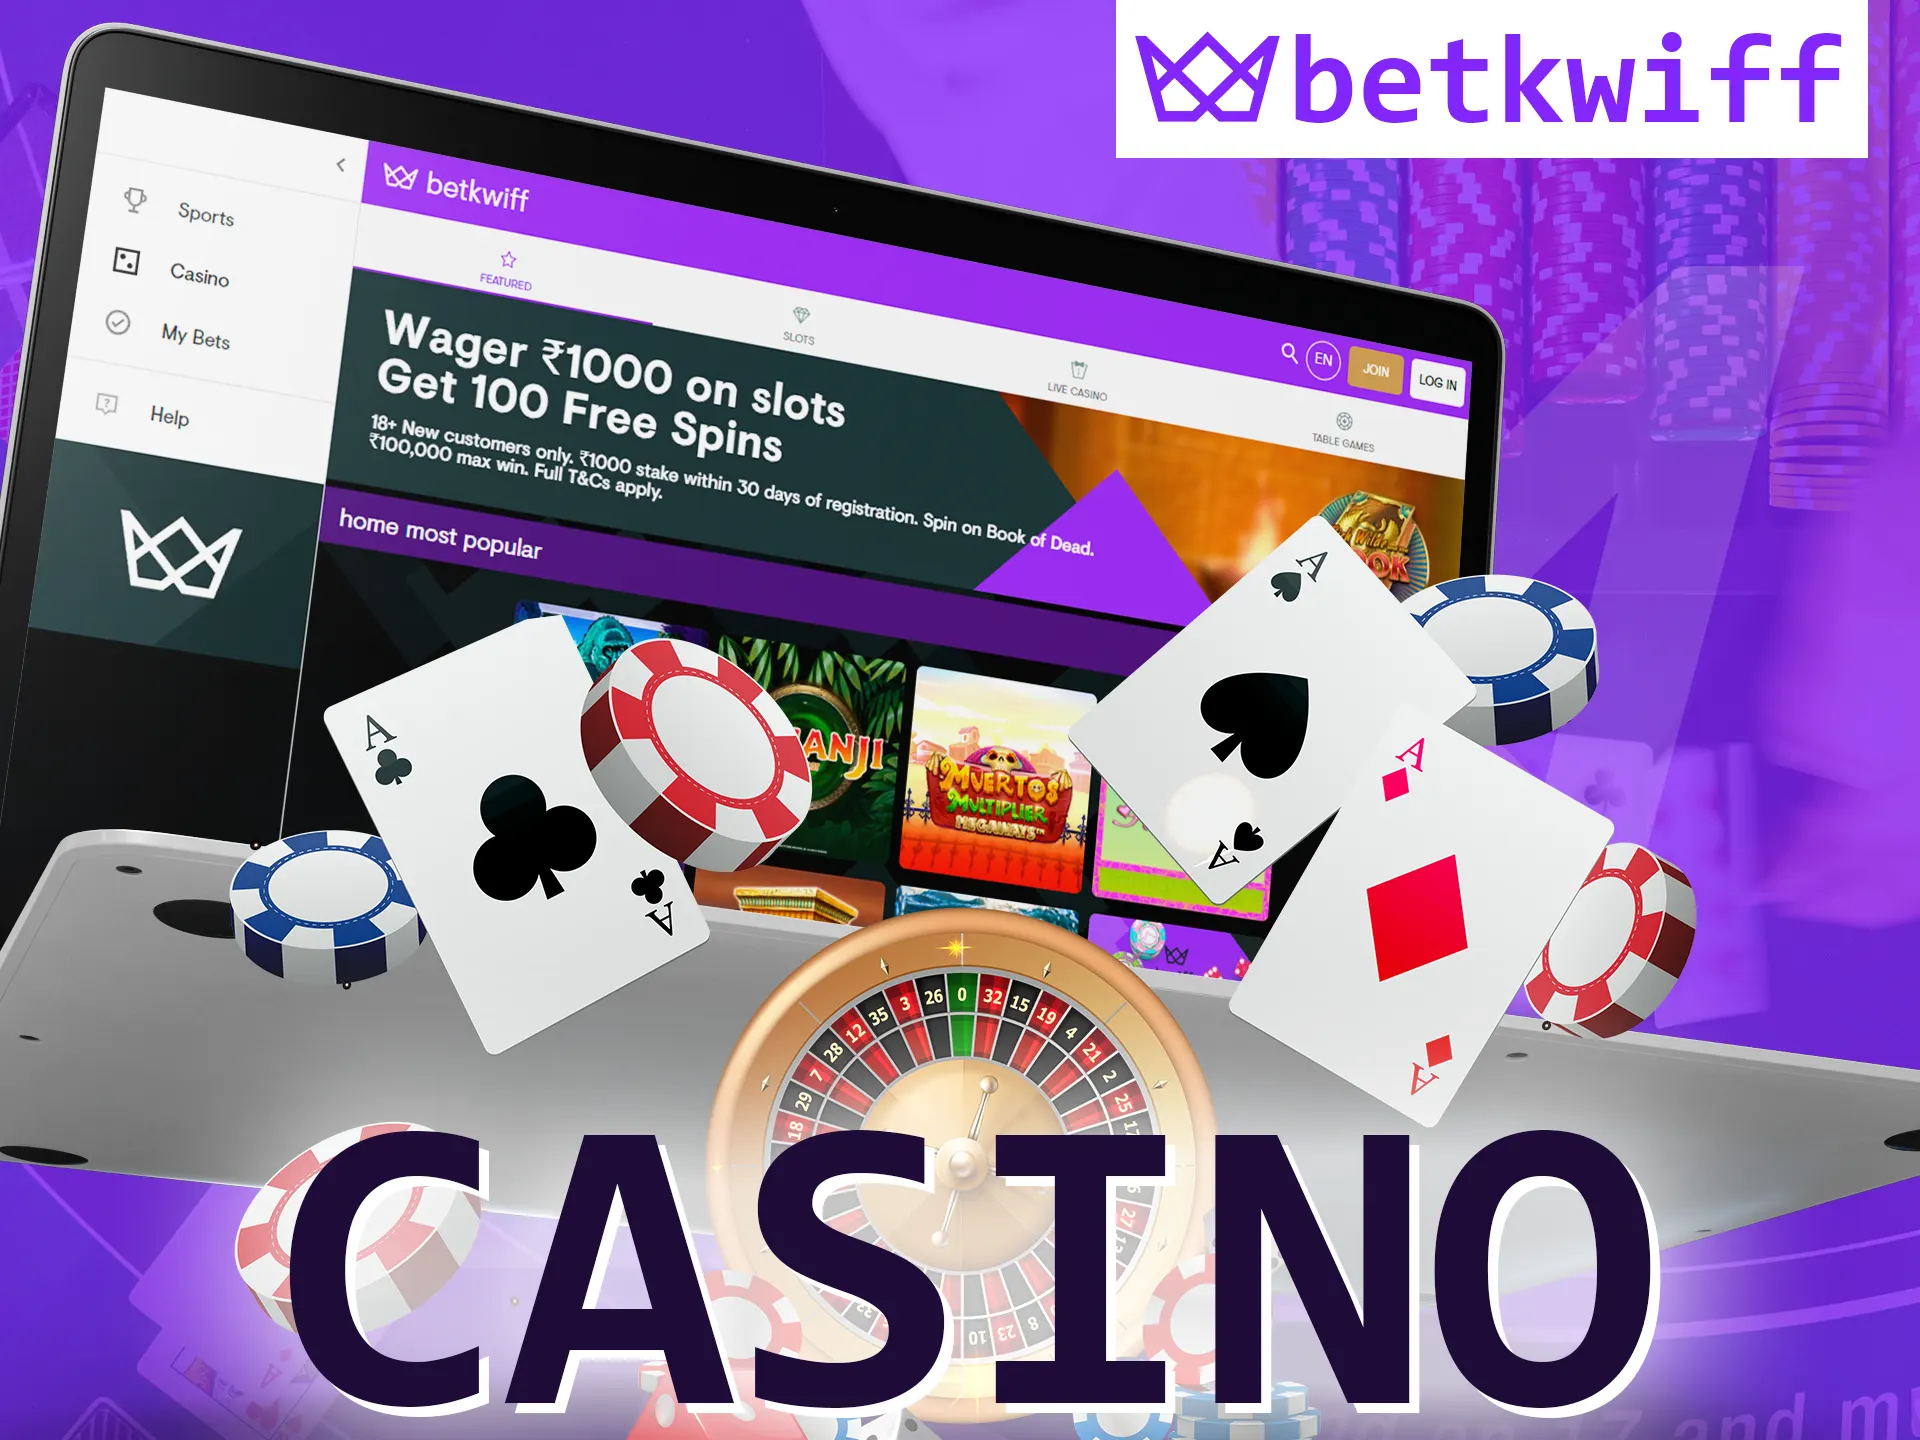 With Betkwiff, go to the casino and play.